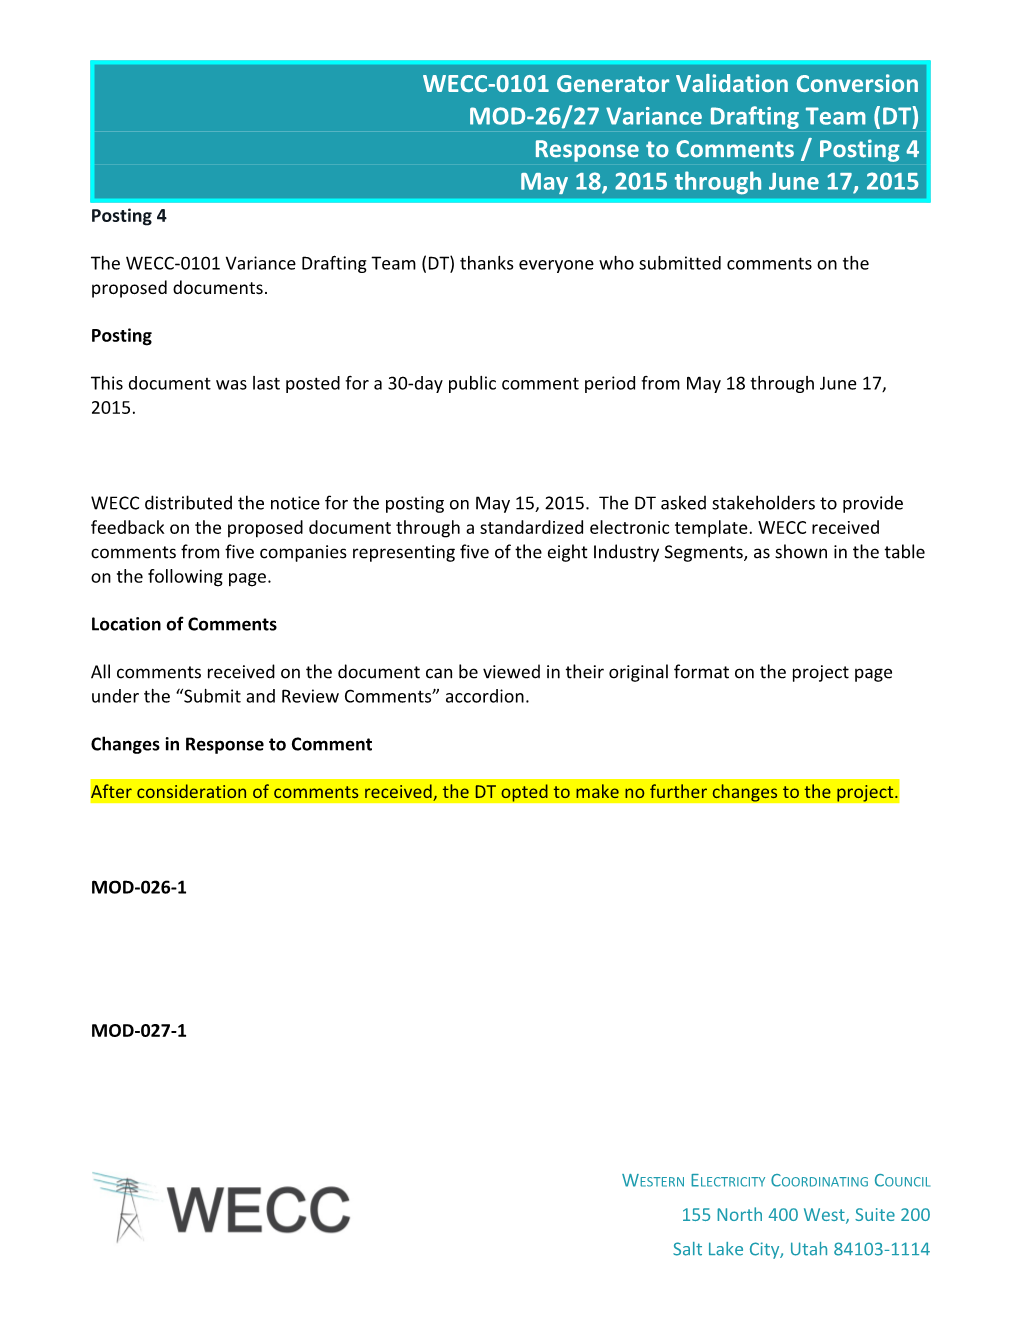 WECC-0101 Generator Validation Conversion Posting 4 Response to Comments - Draft for 7-7-2015